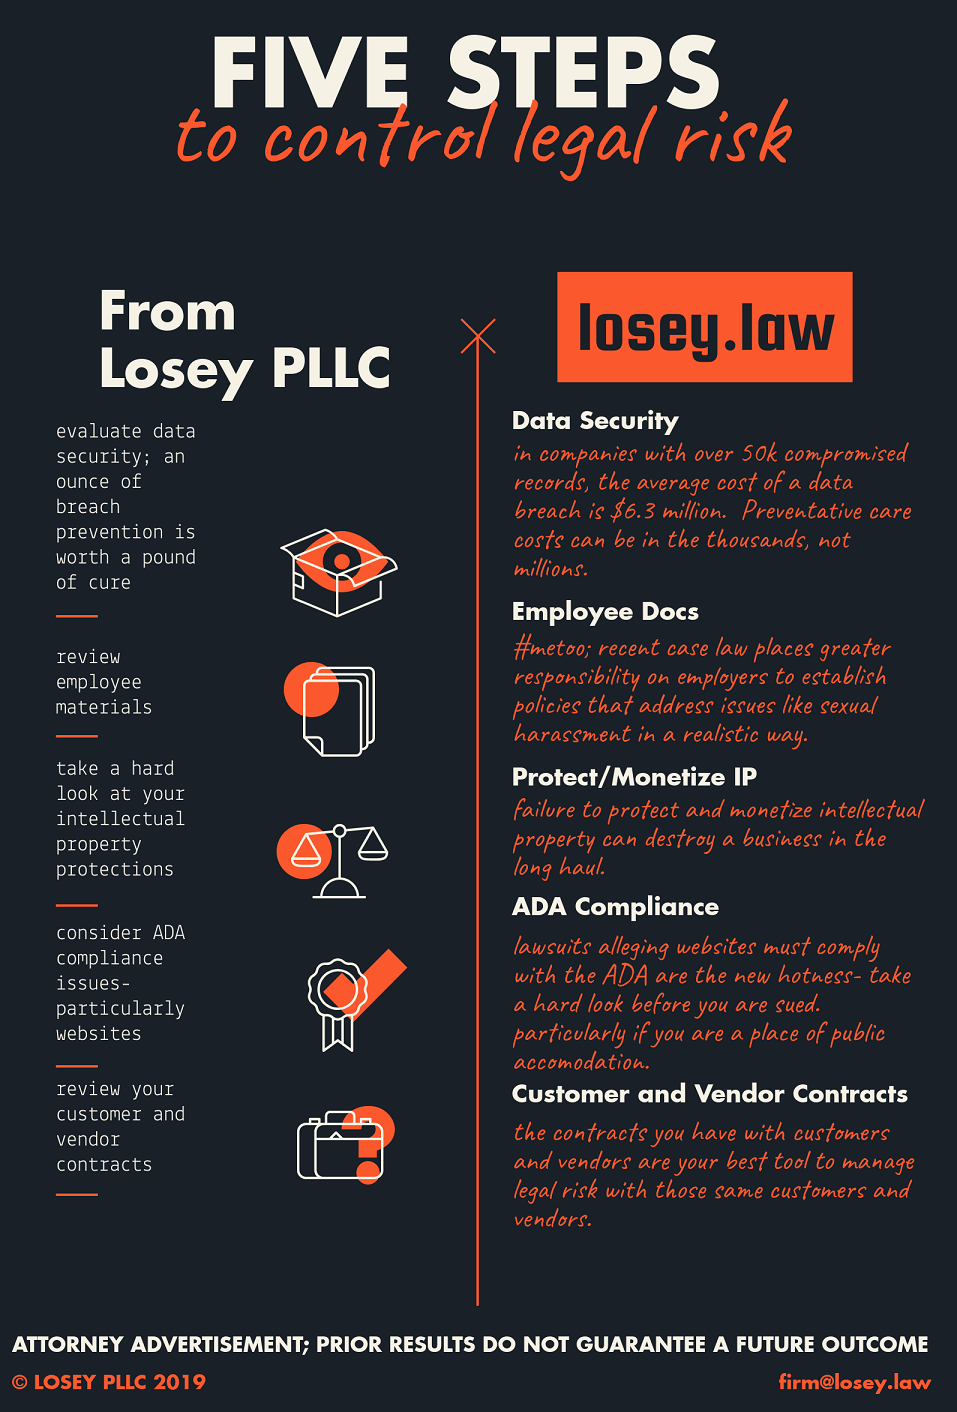 Losey PLLC Controlling Legal Risk Infographic 2.10.19